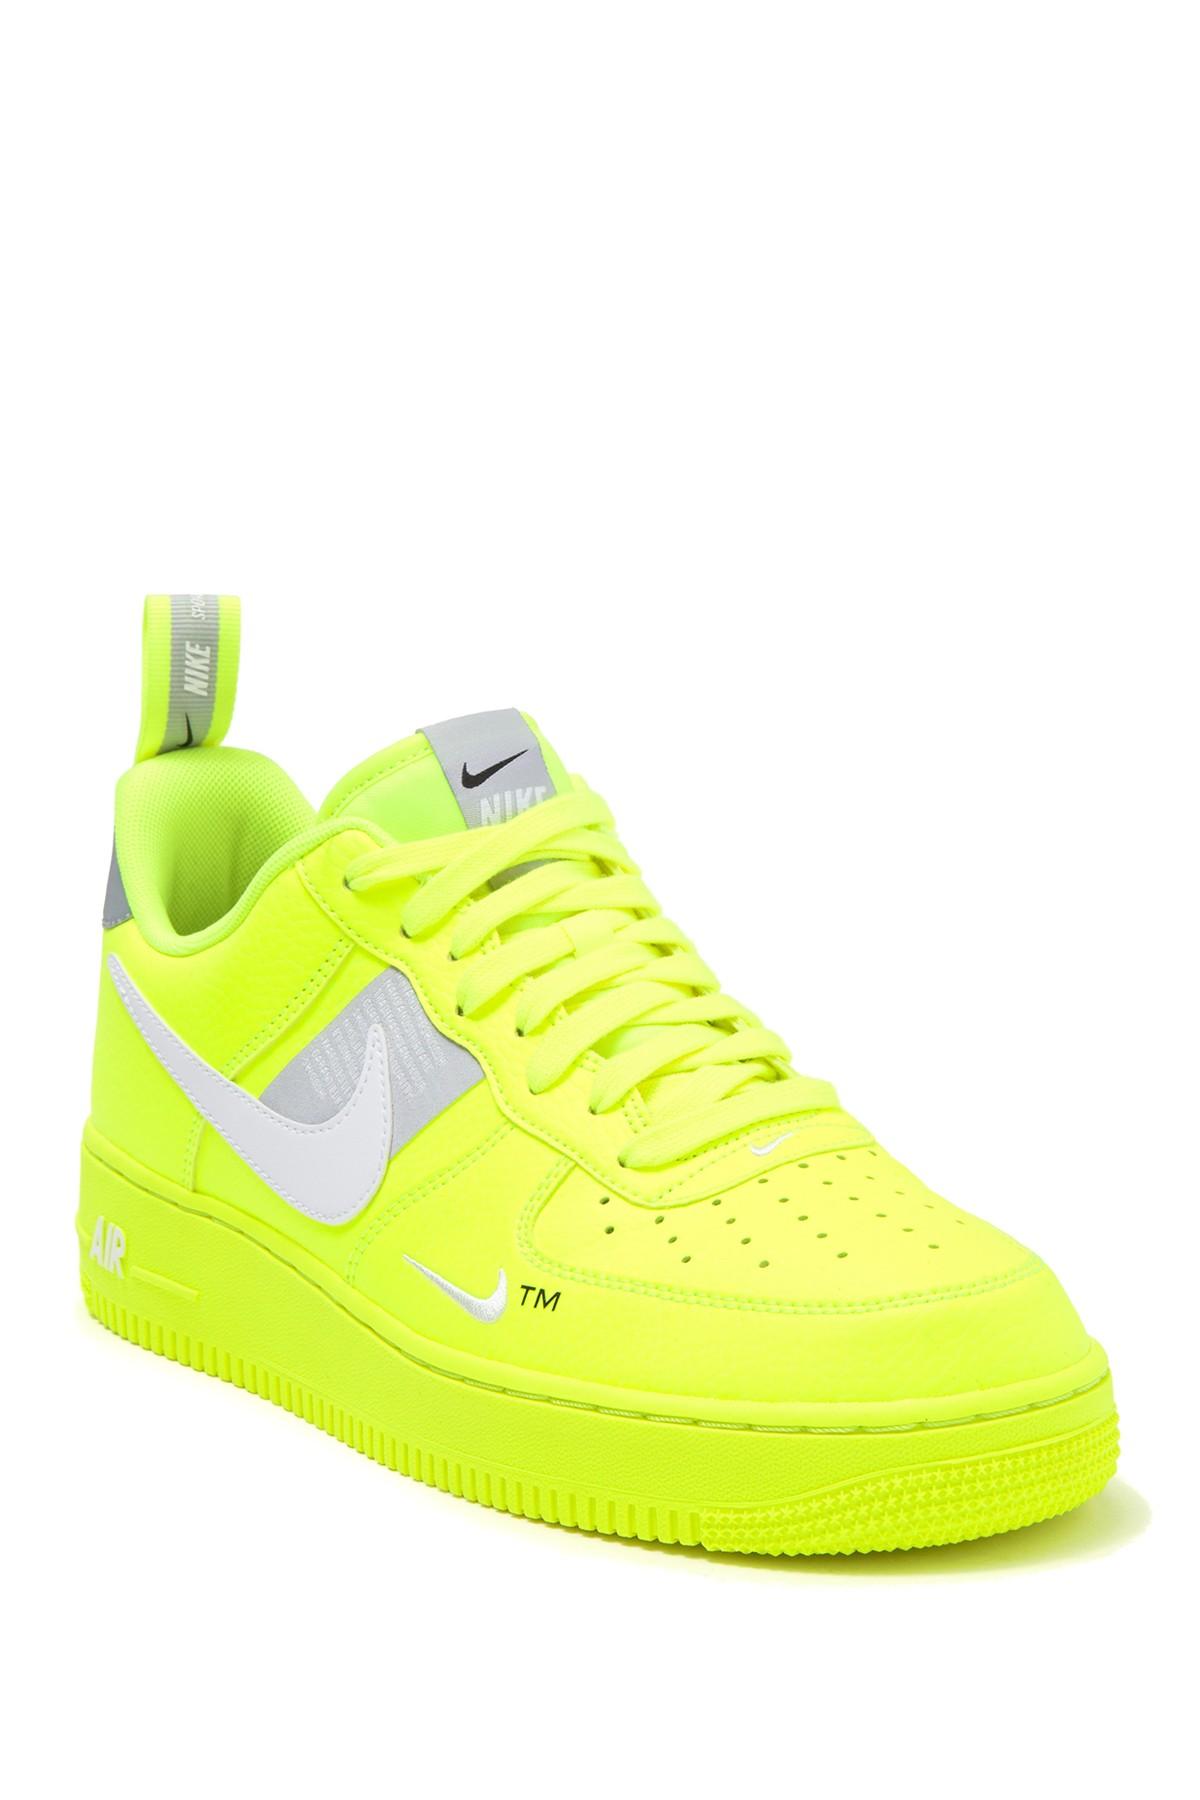 yellow air force 1 07 lv8 utility trainers